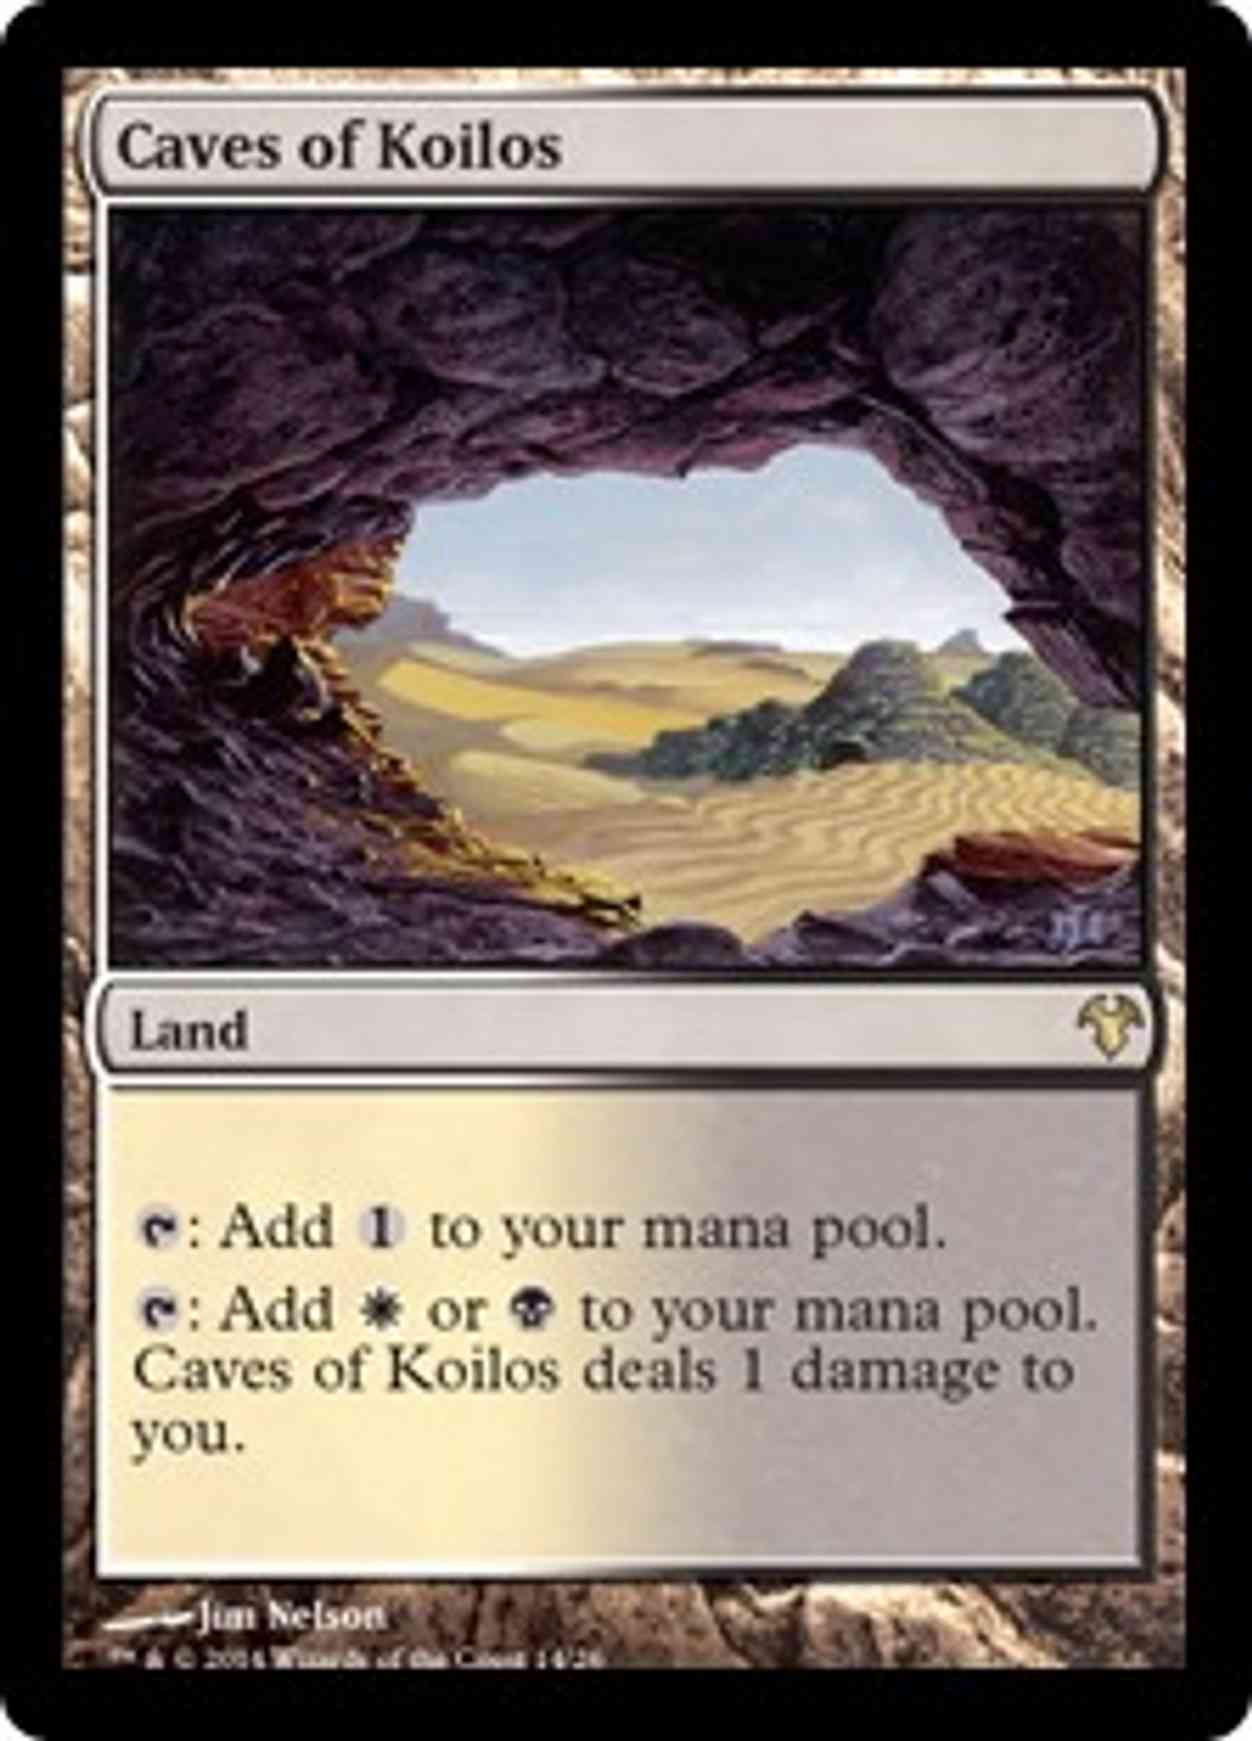 Caves of Koilos magic card front